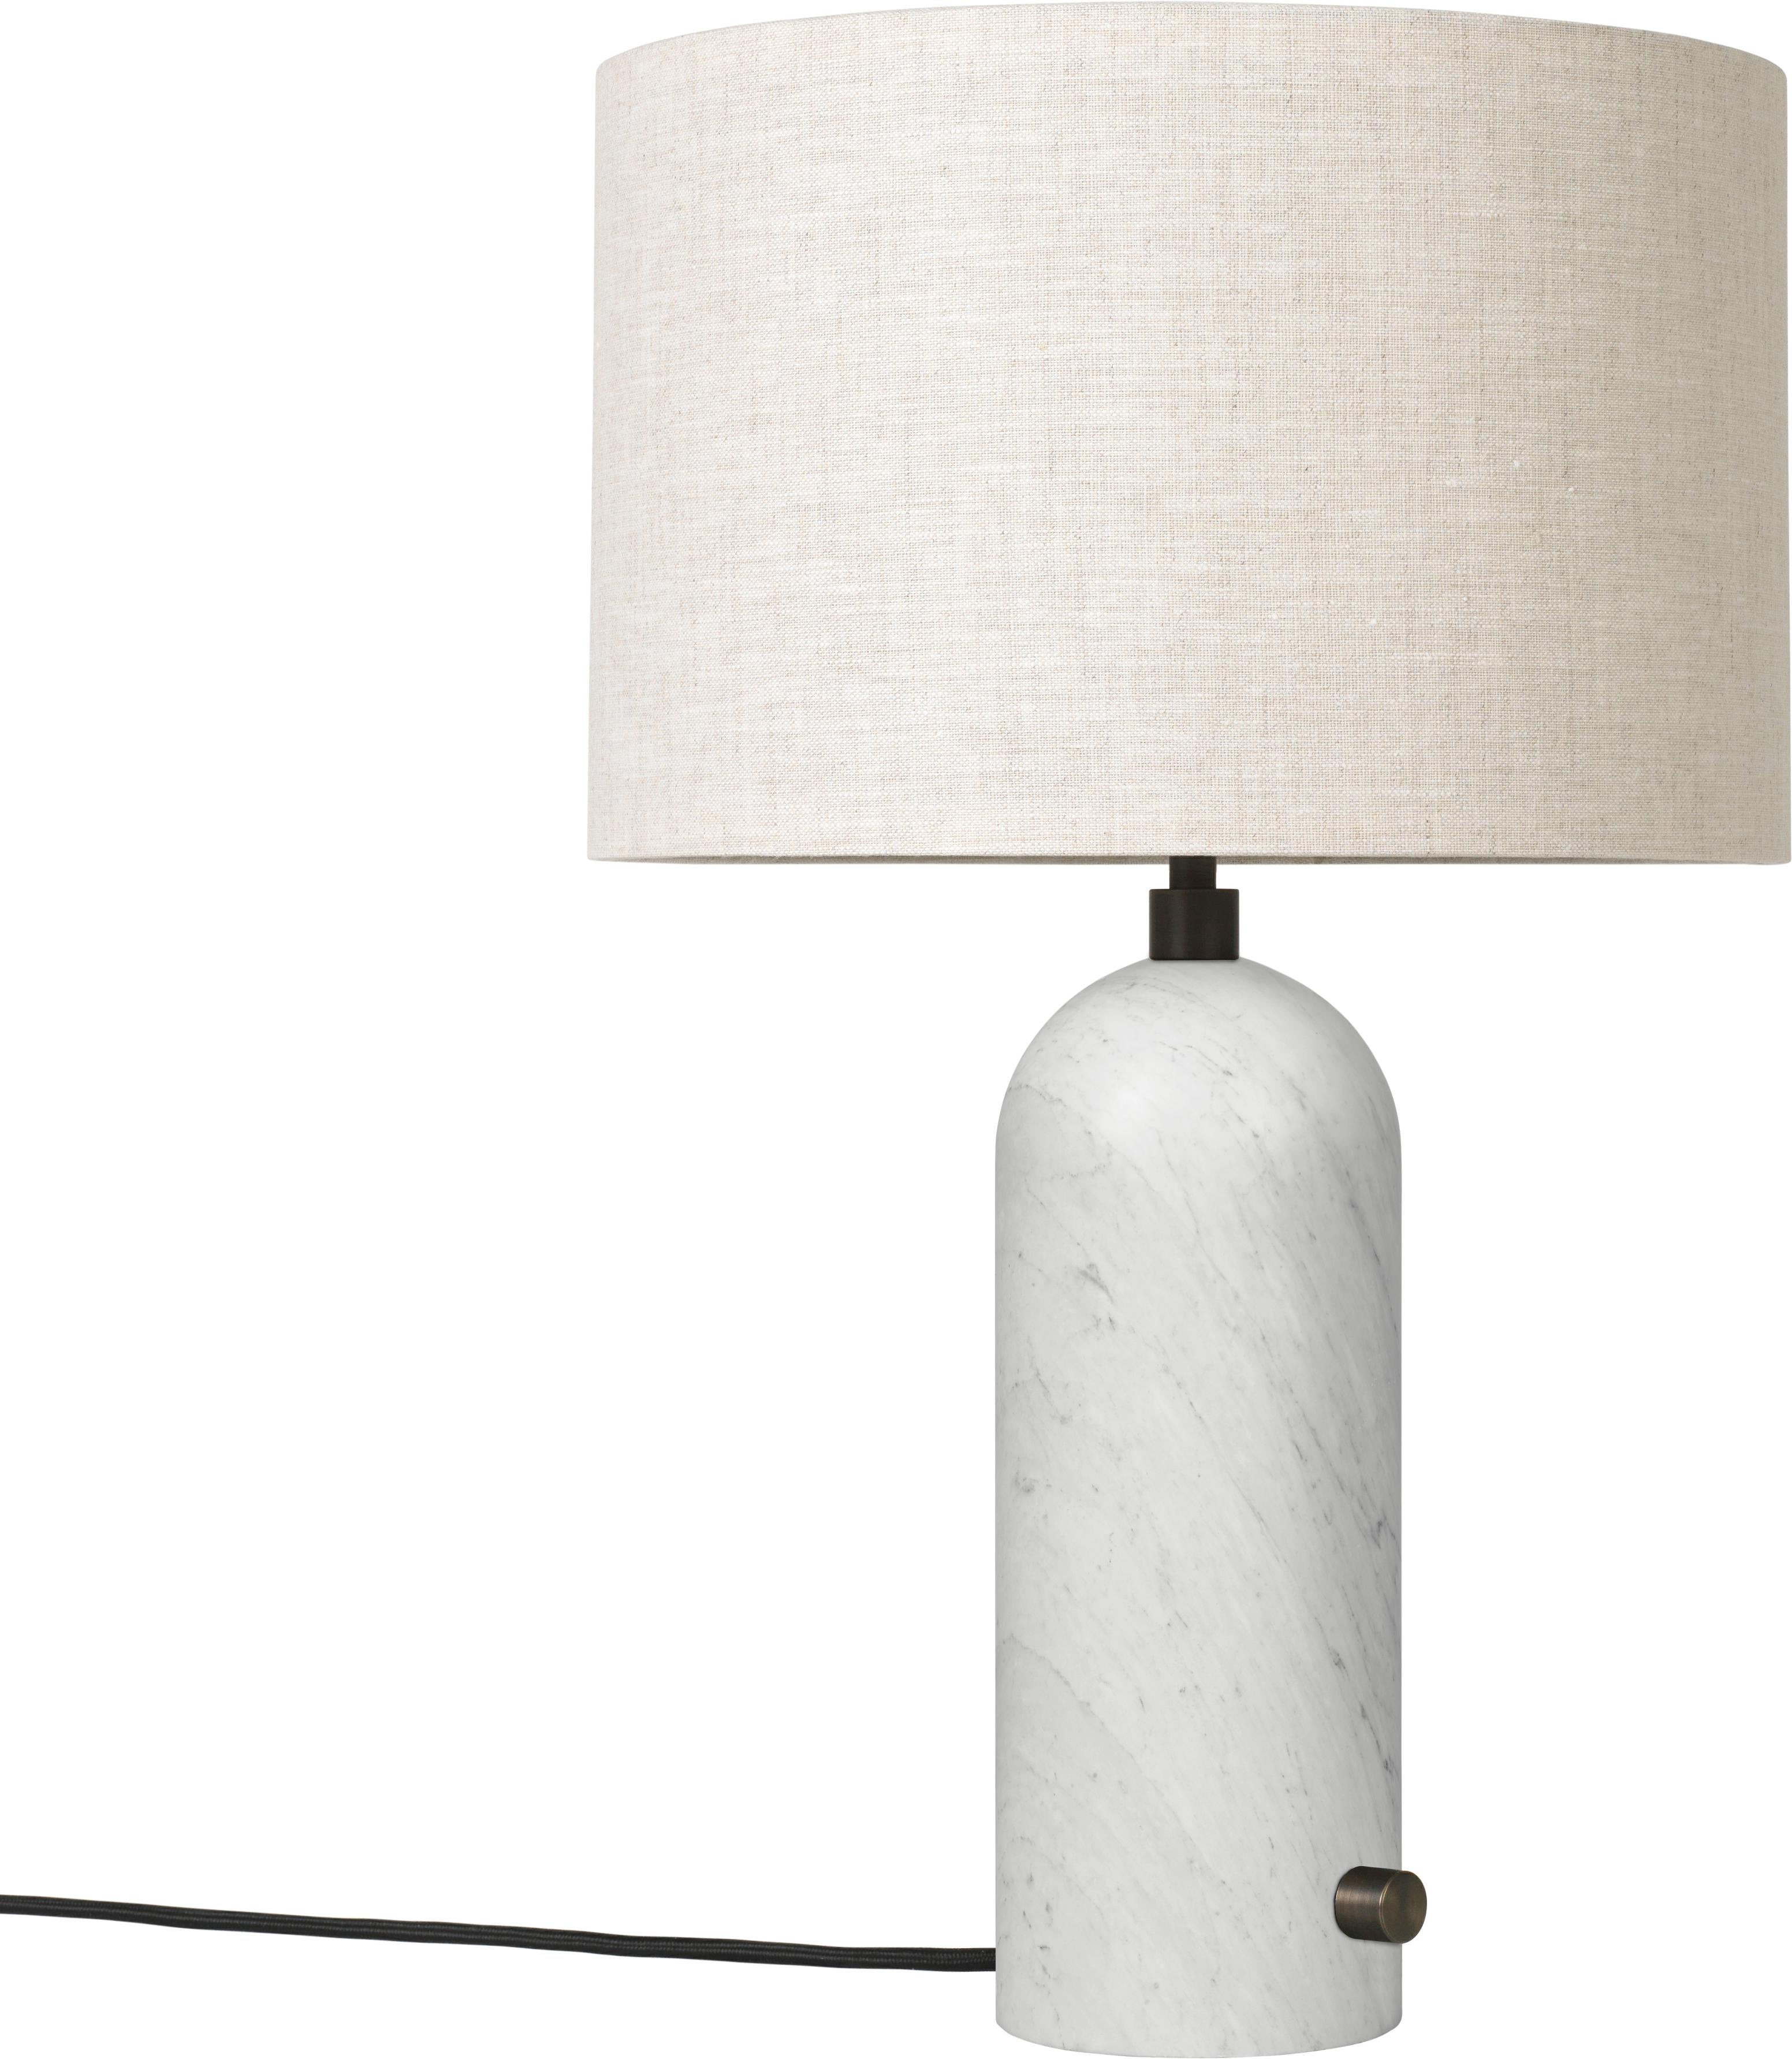 Large 'Gravity' Marble Table Lamp by Space Copenhagen for Gubi in Black For Sale 8